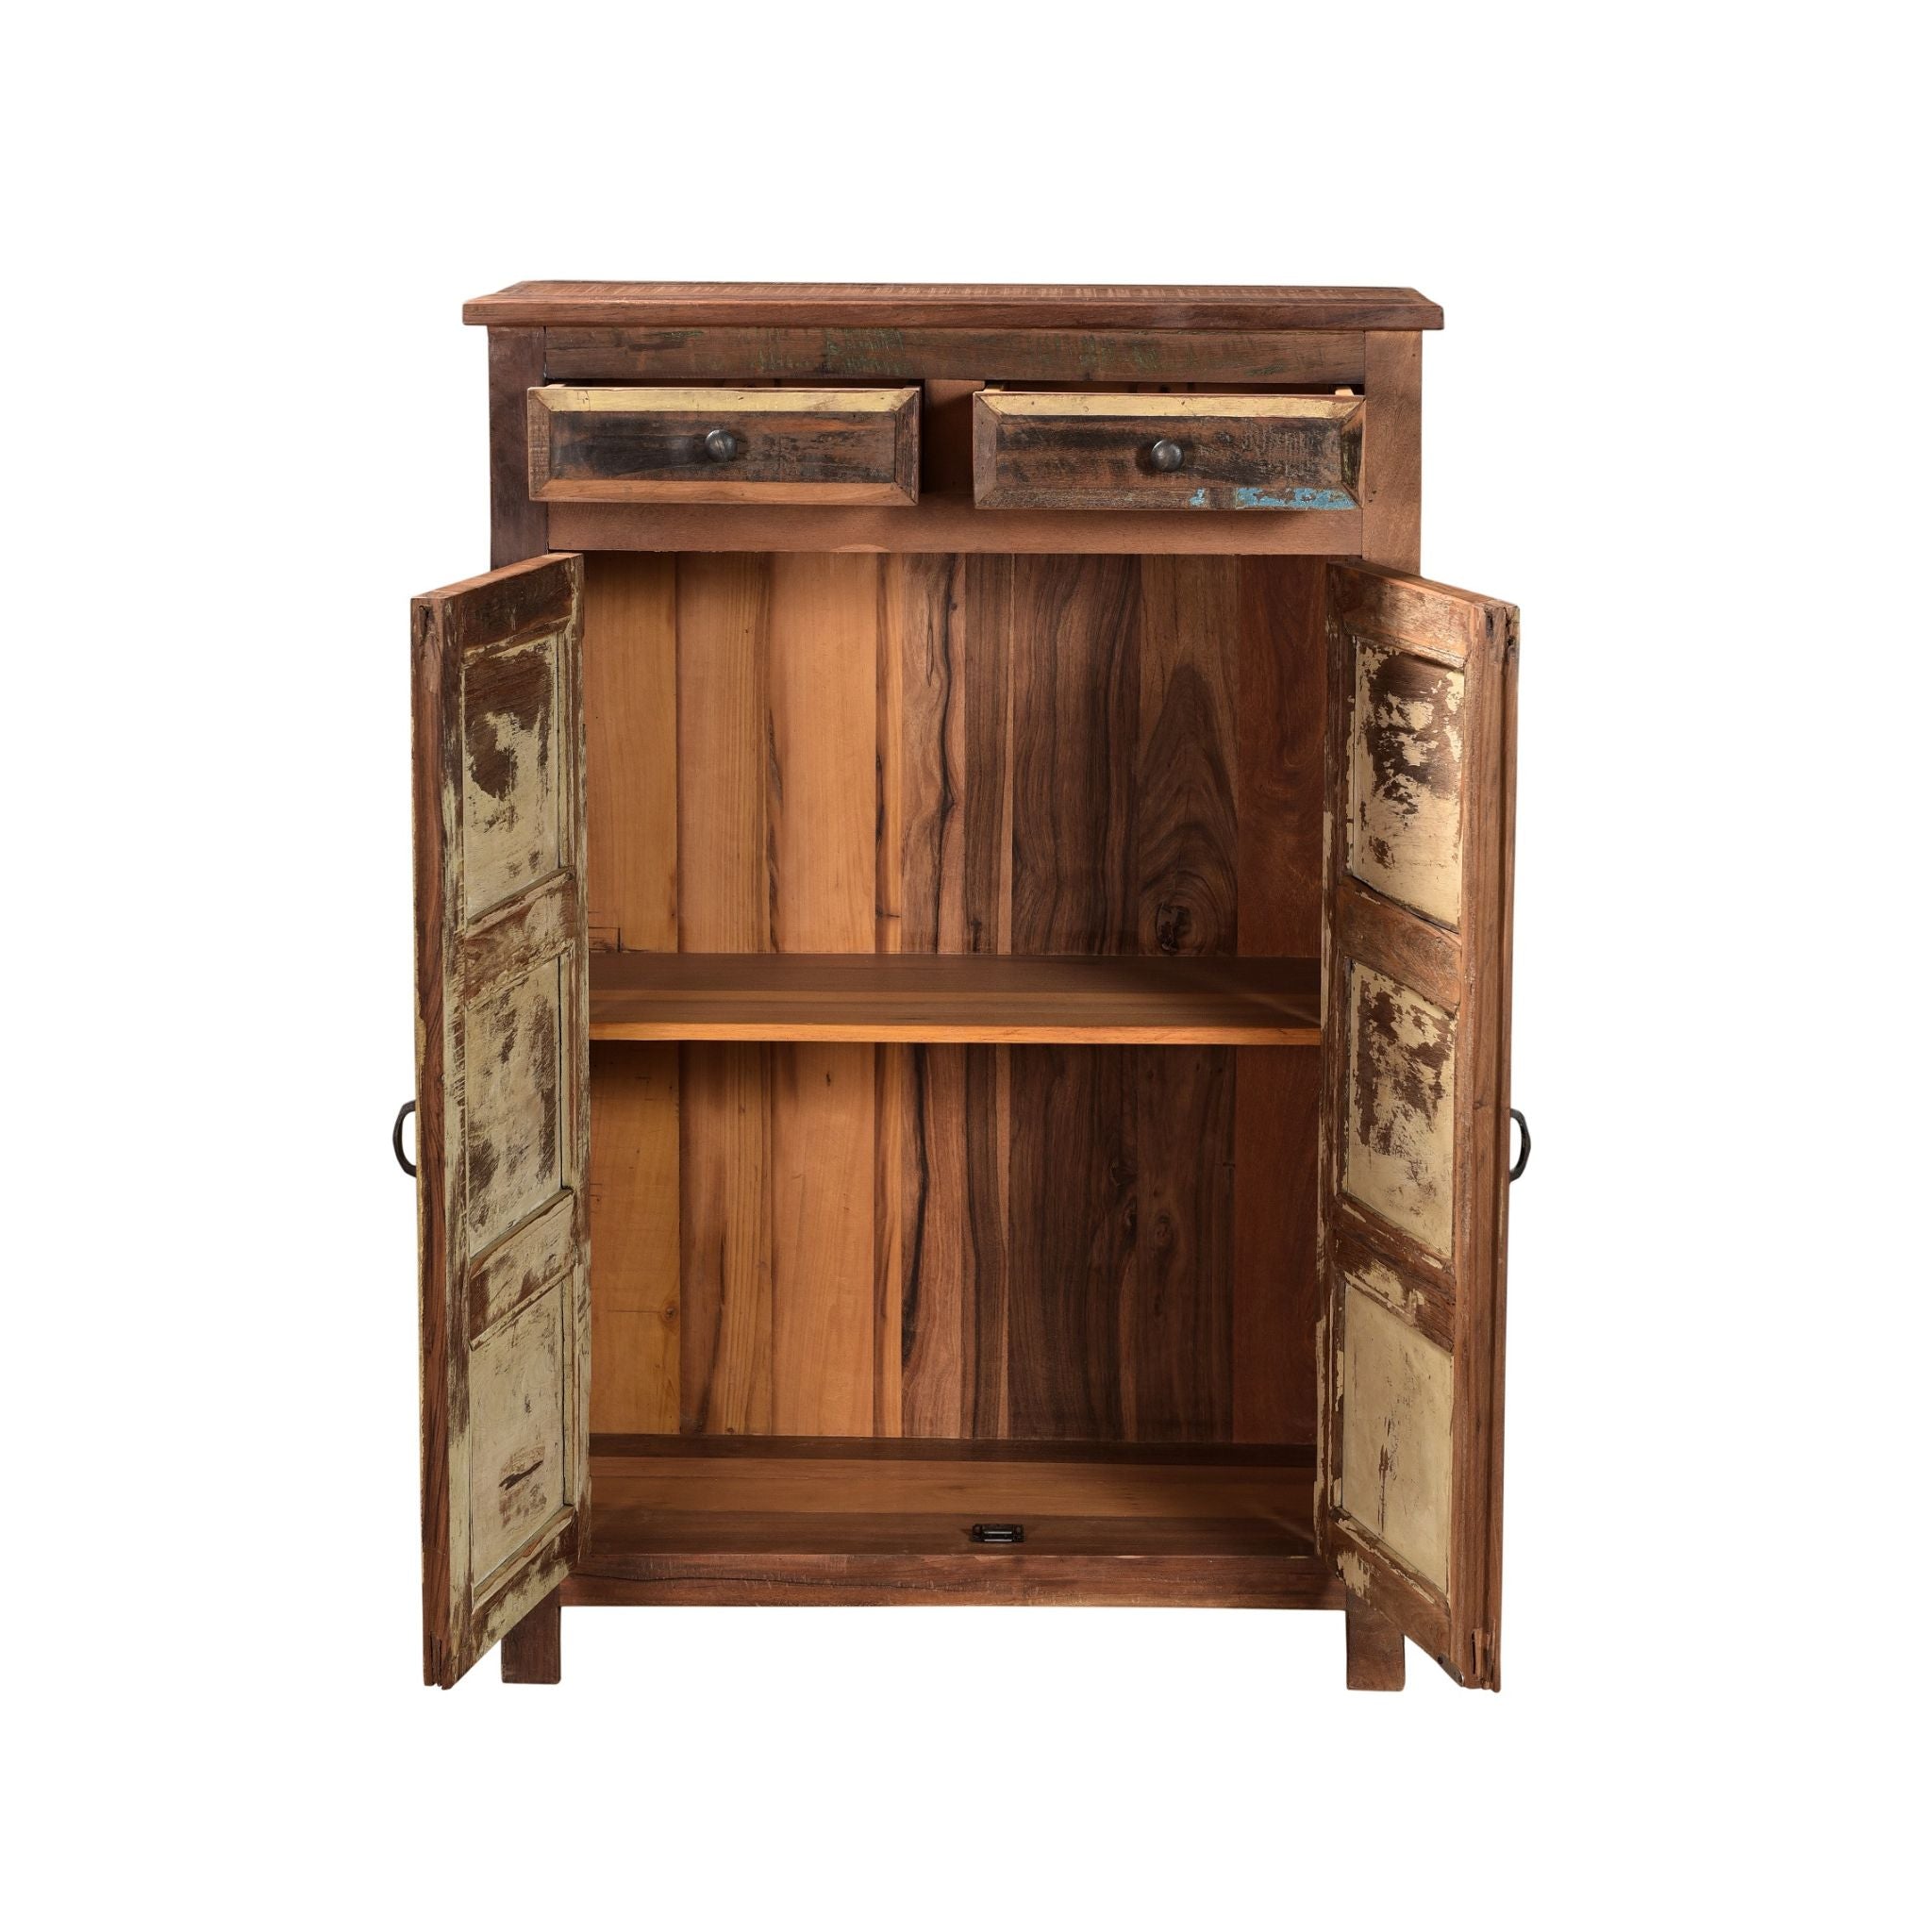 Kalinga 2 Drawers Cabinet with open drawers and doors